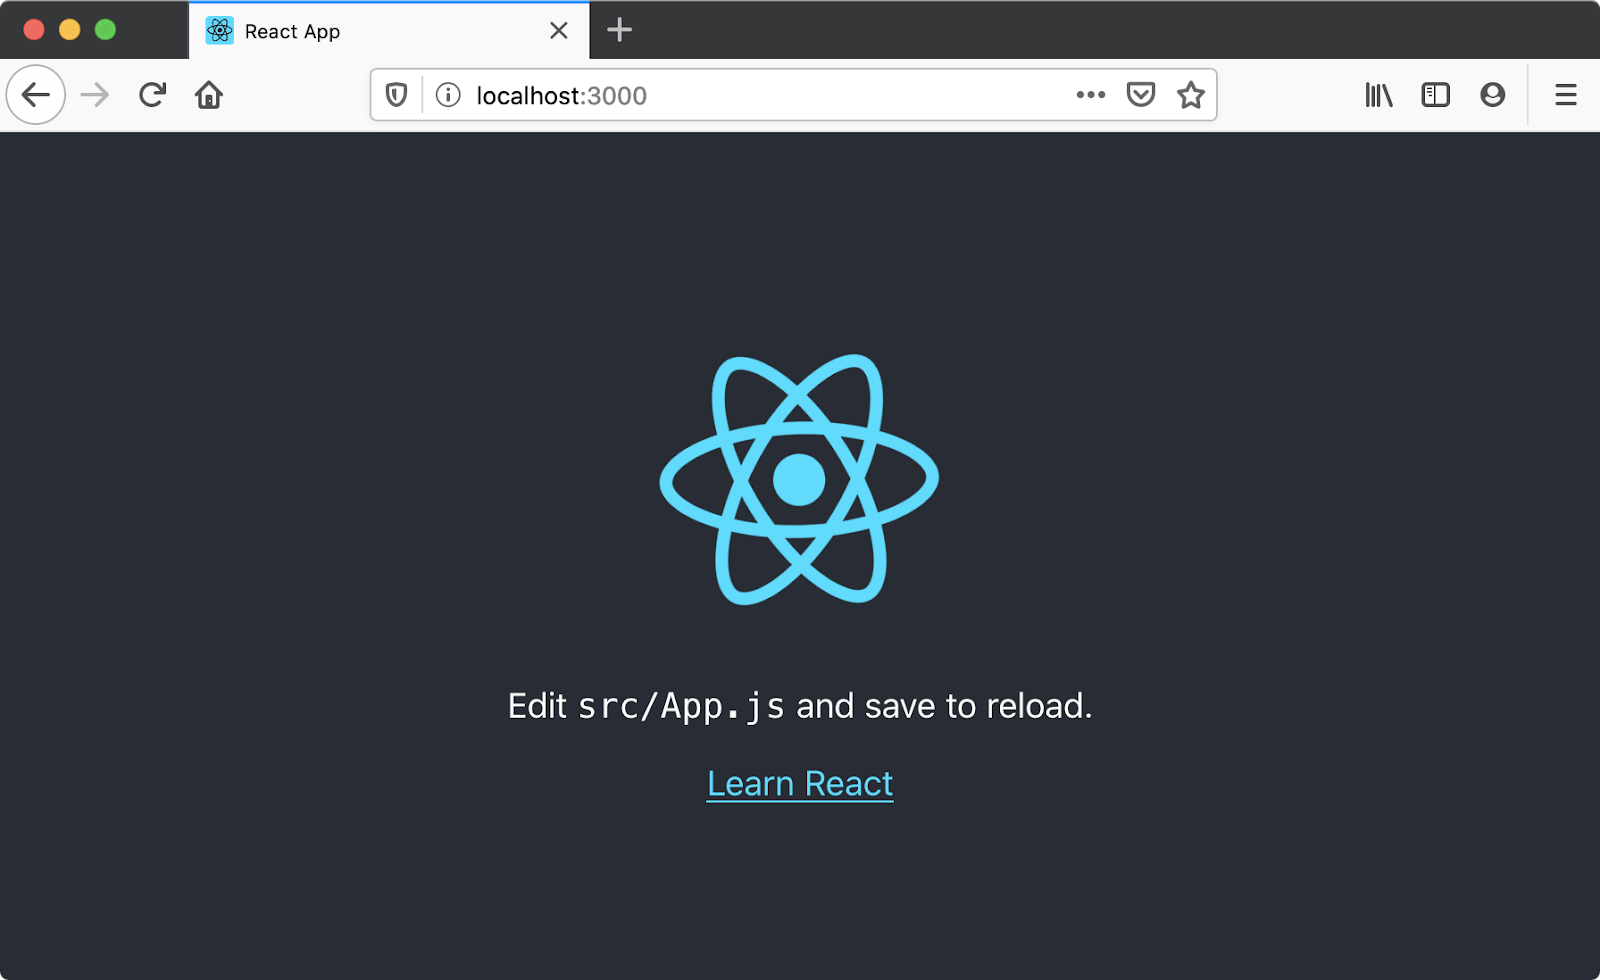 Screenshot of Firefox MacOS, open to localhost:3000, showing the default create-react-app application